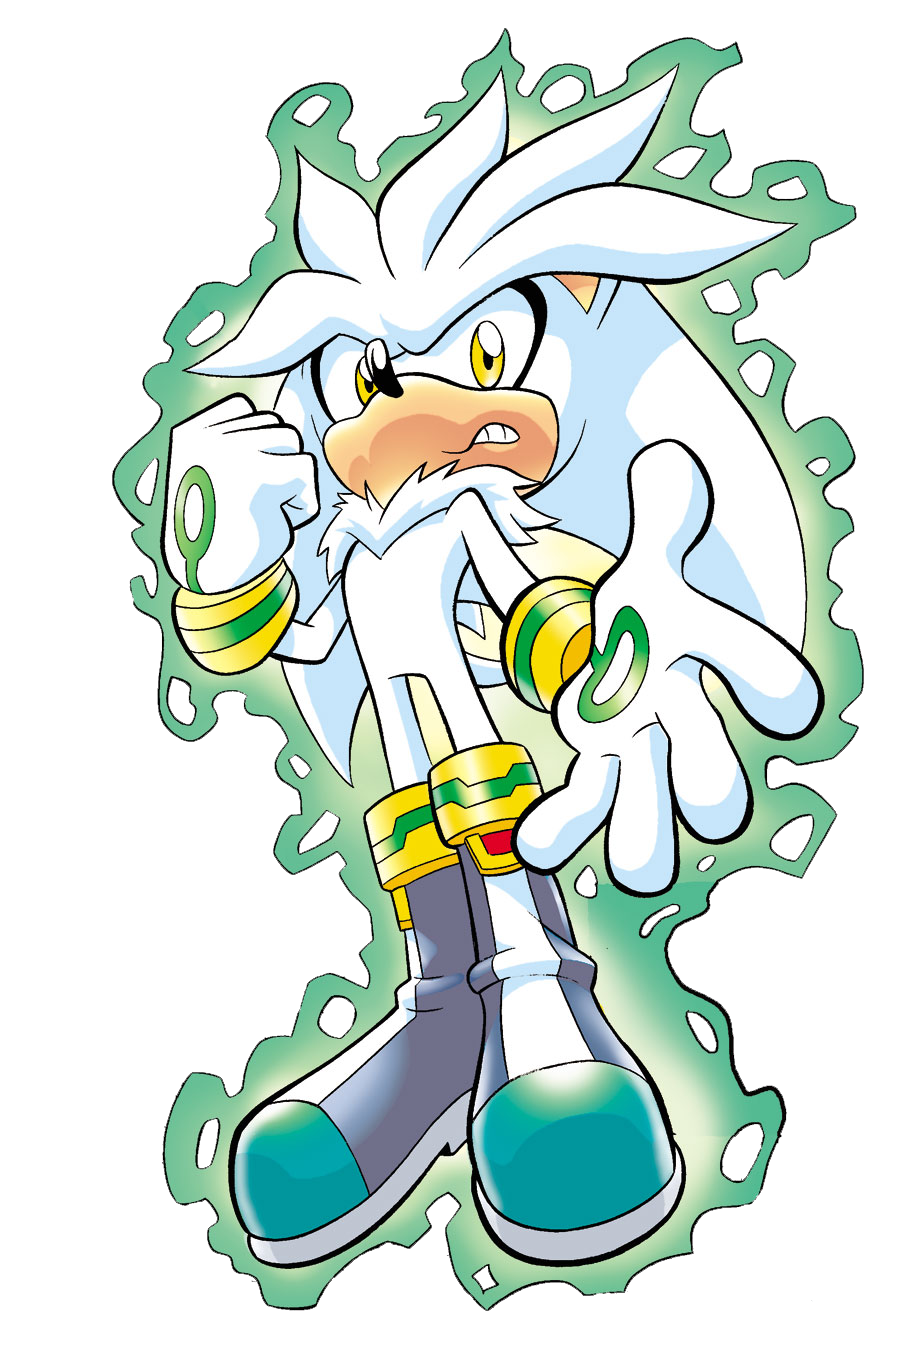 Waves clipart comic. Silver the hedgehog pre